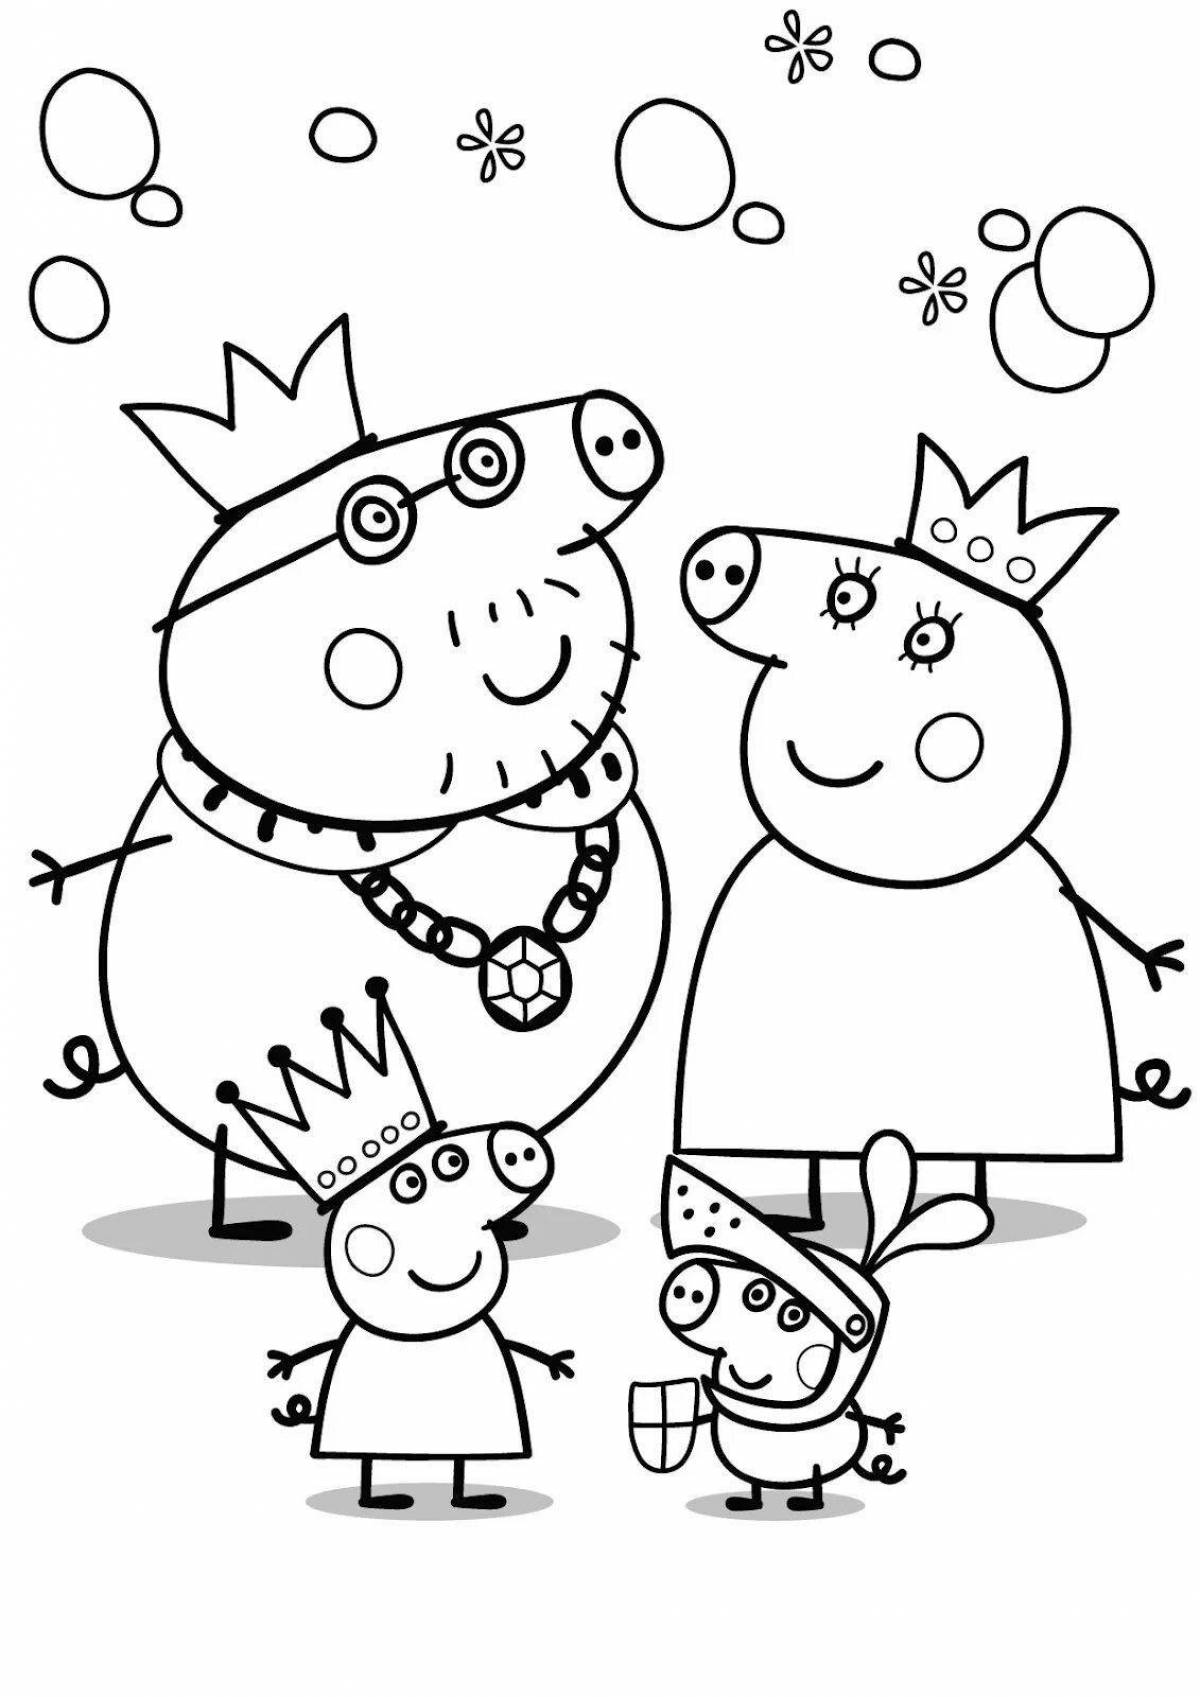 Cute peppa pig coloring pages for kids